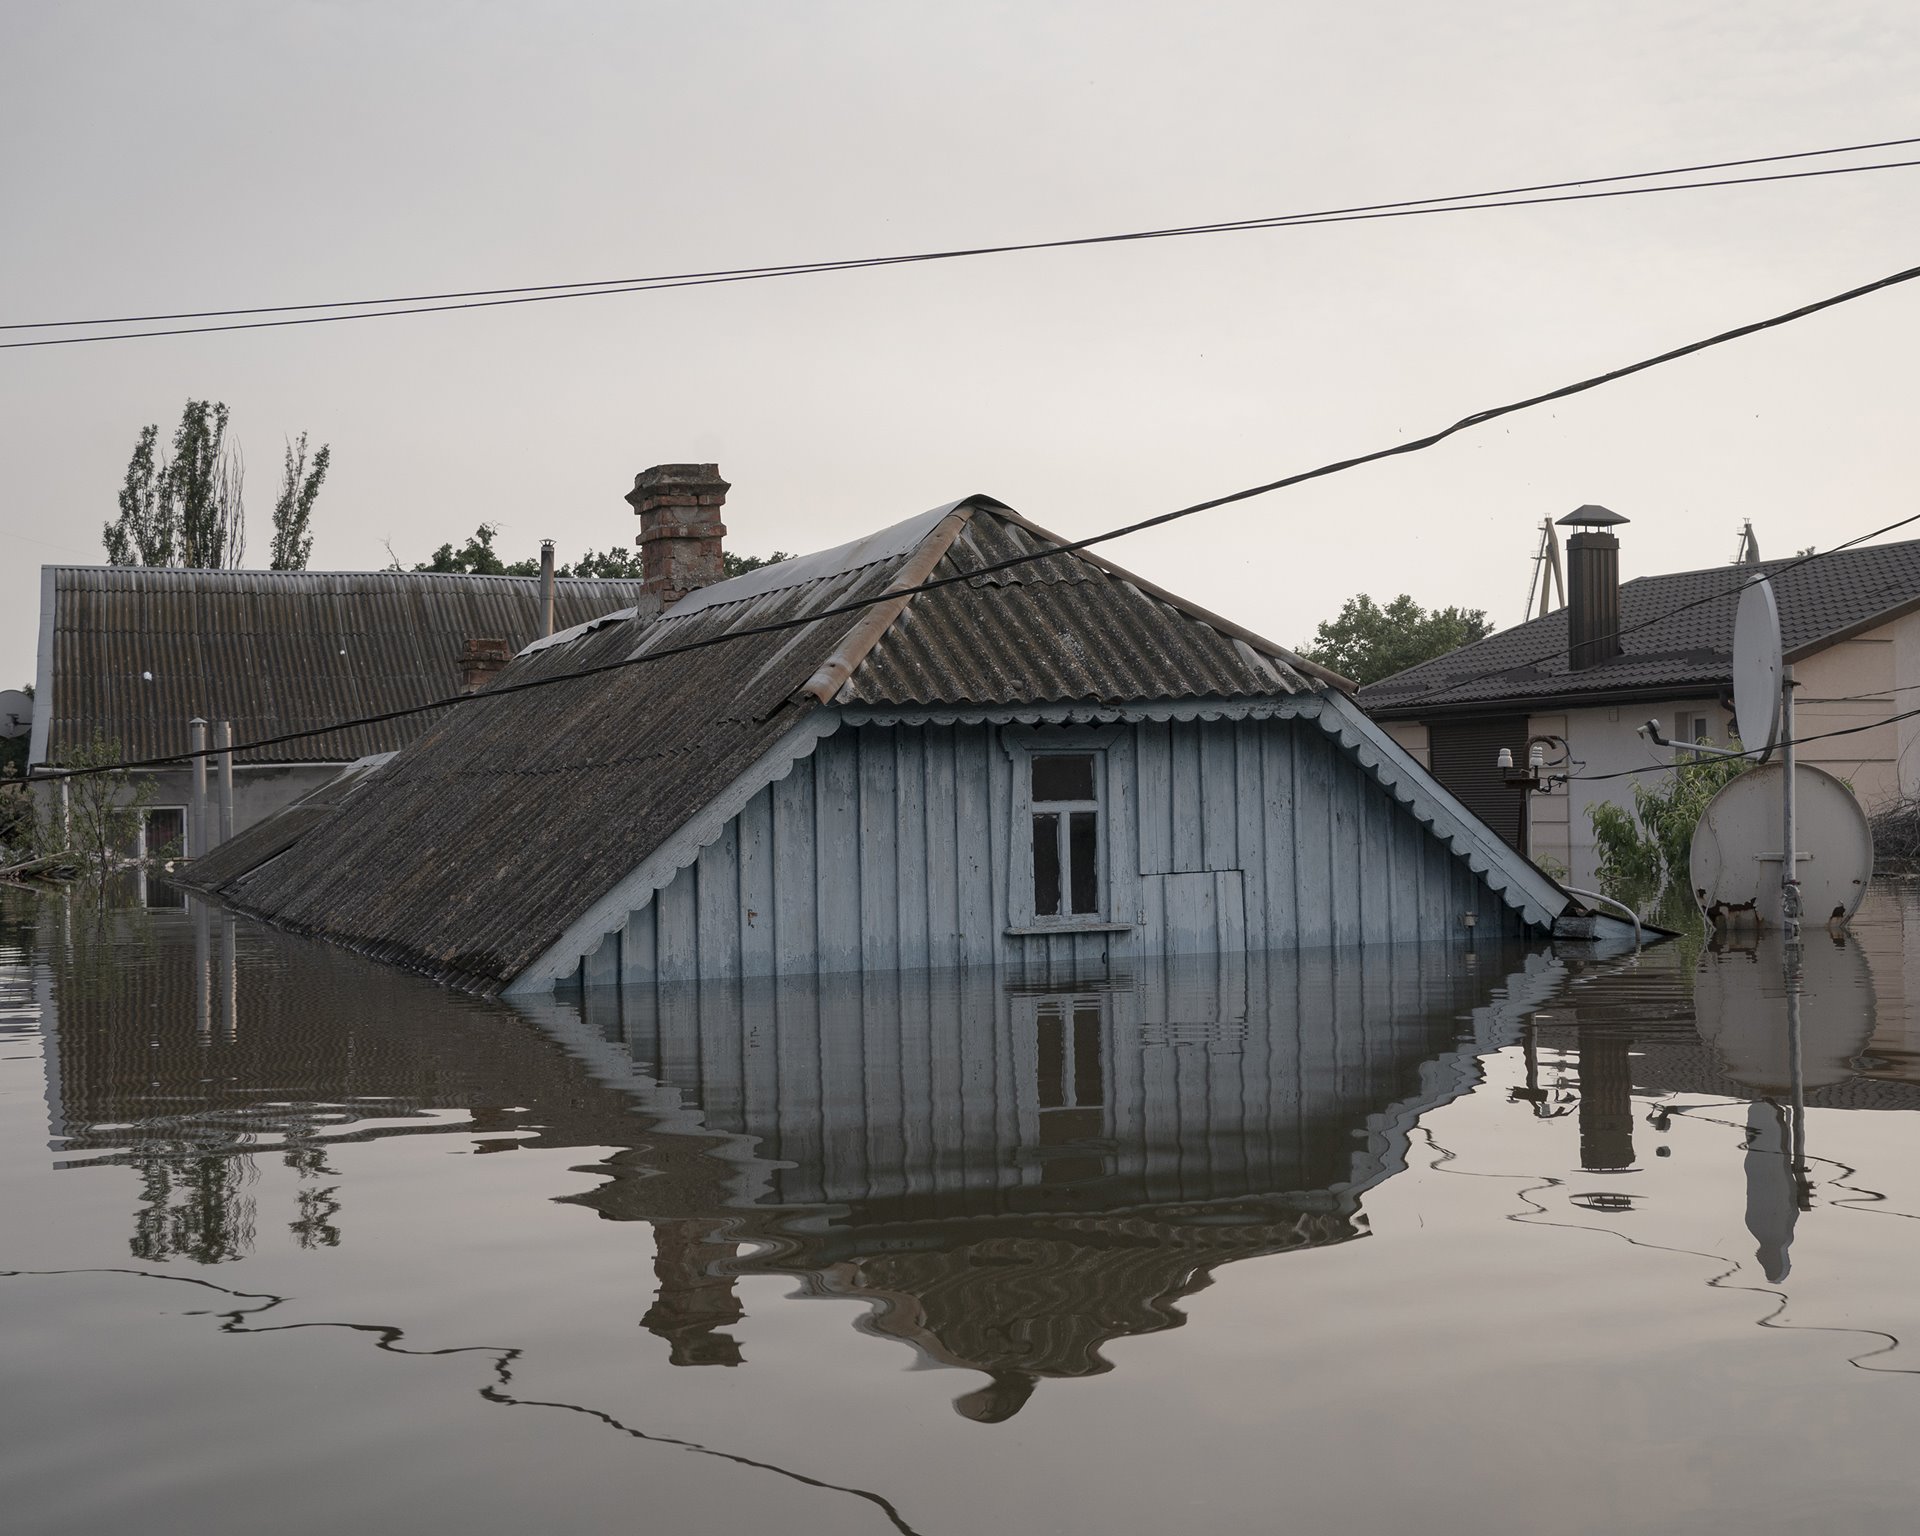 A flooded house in the city center of Kherson, Ukraine.